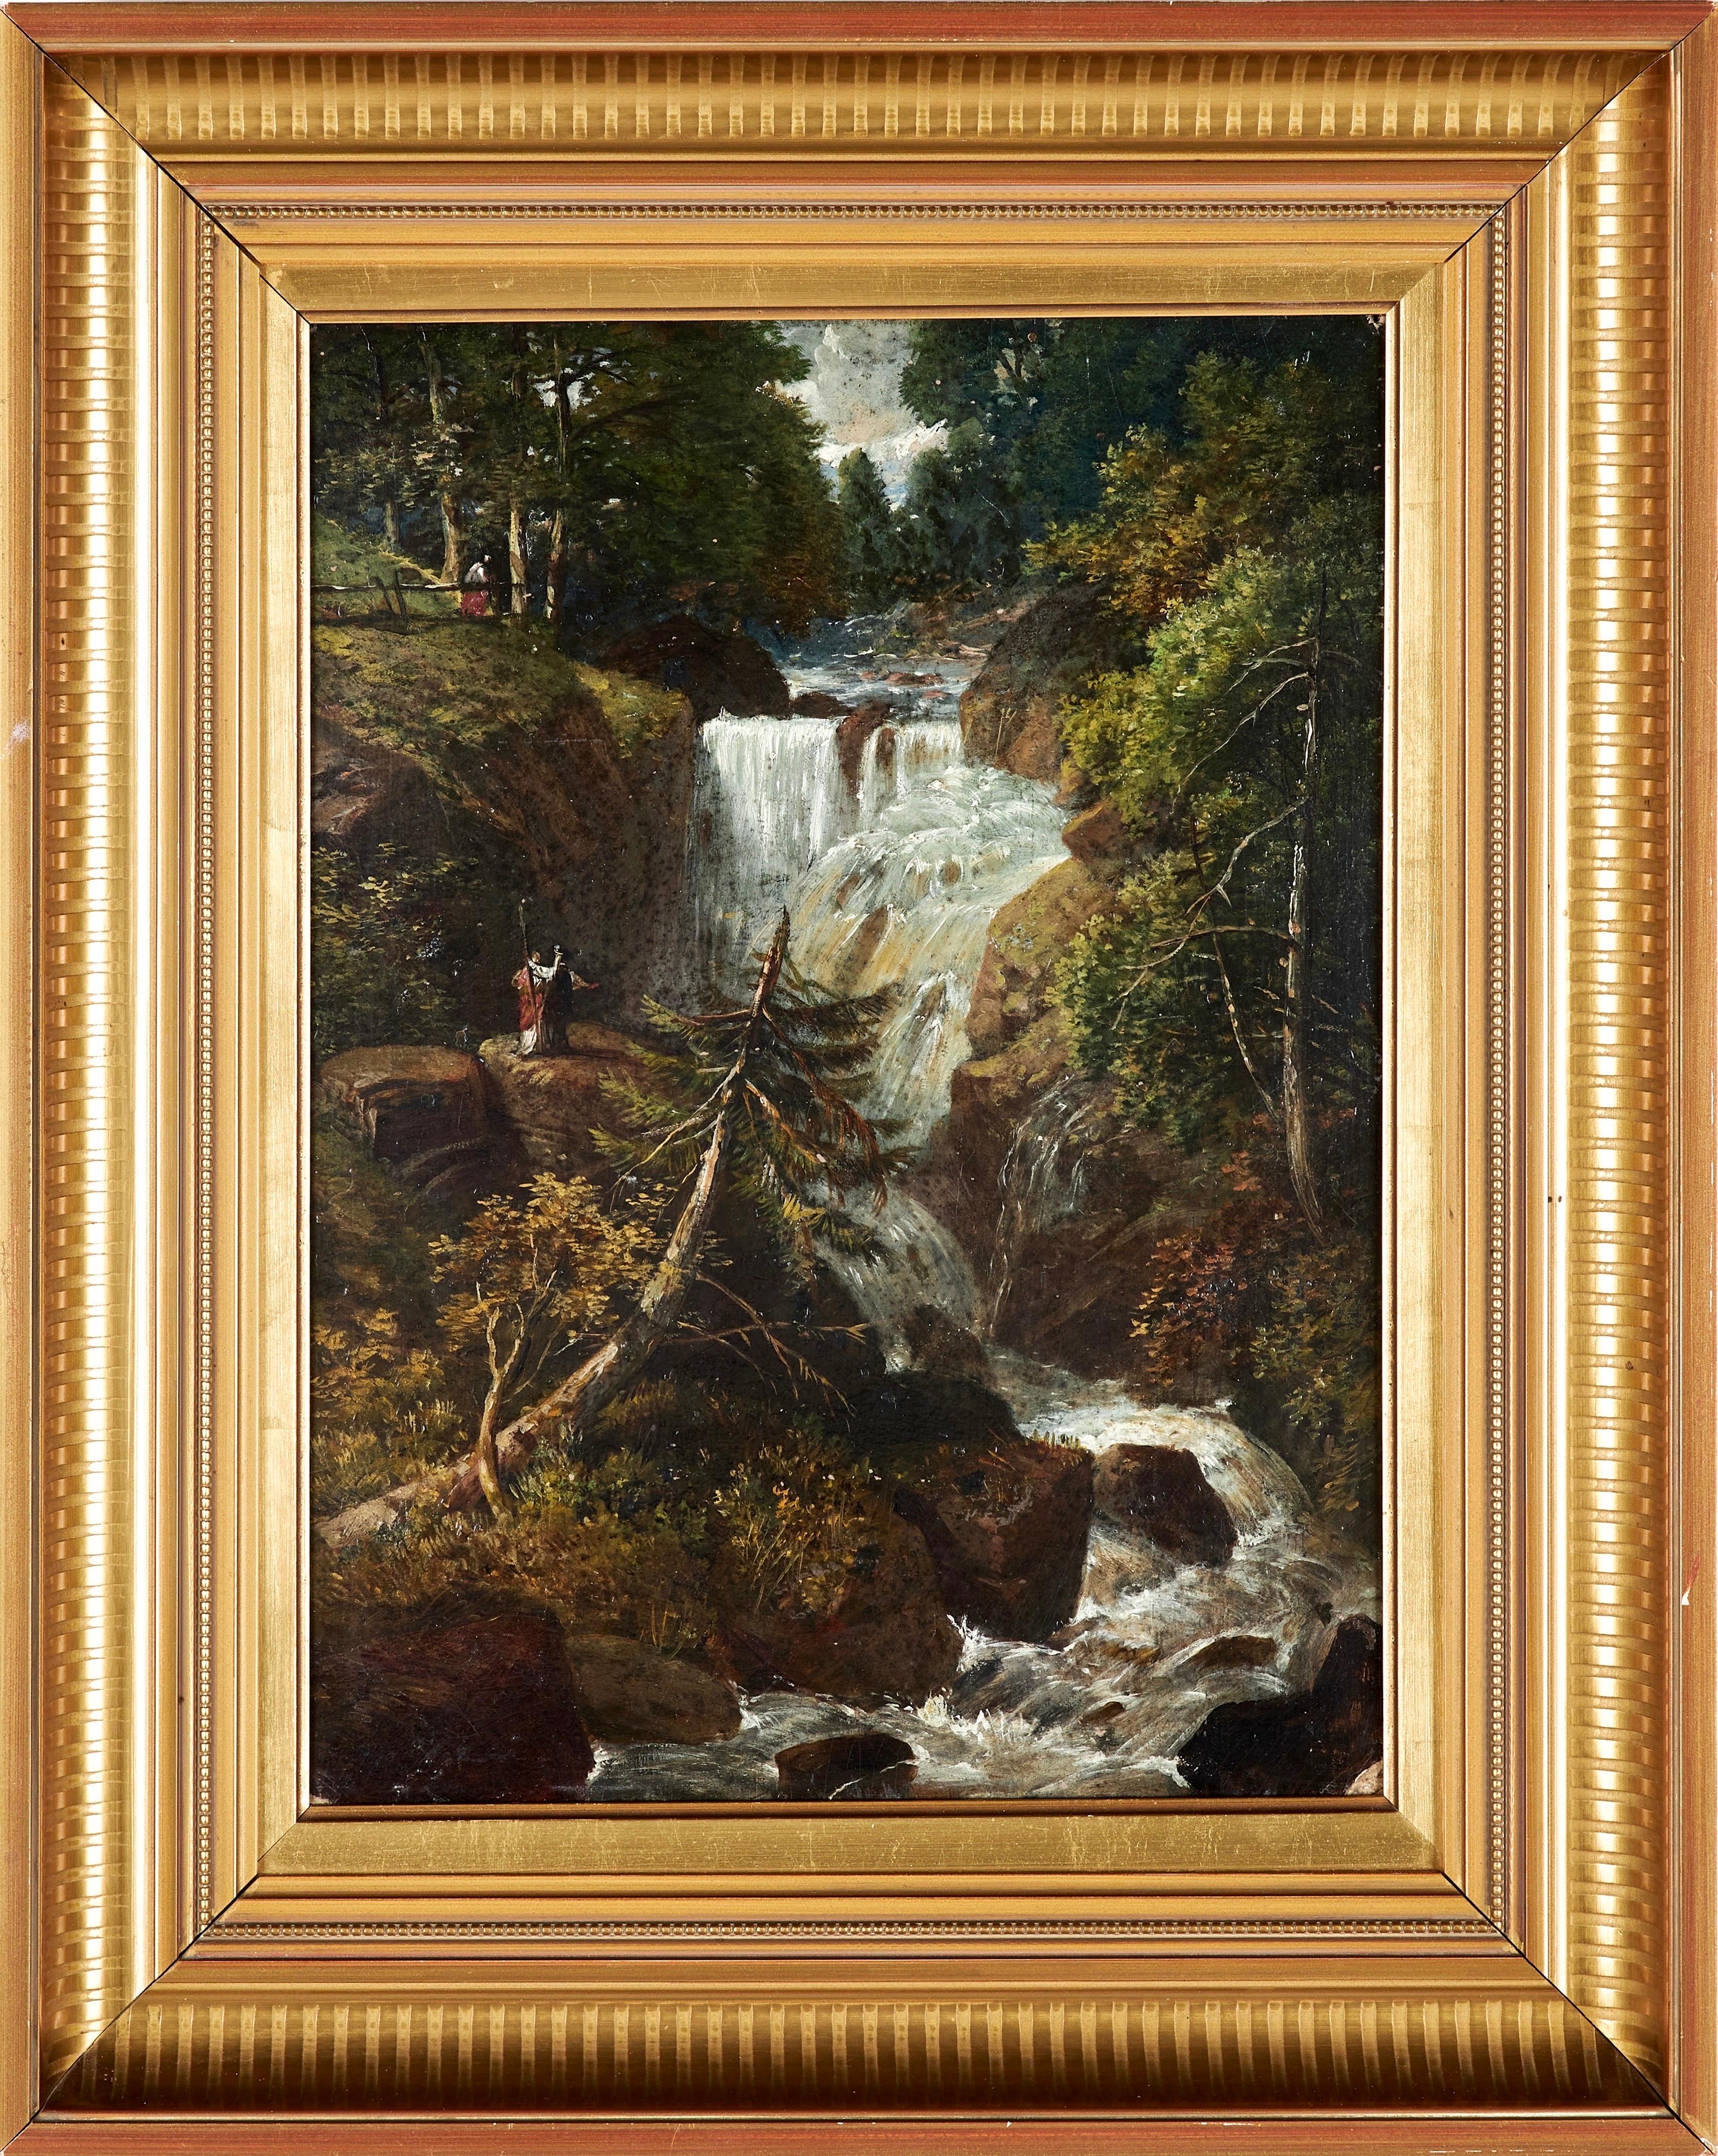 Unknown Figurative Painting - 19th century oil painting - The romantic getaway to the waterfall - Love 